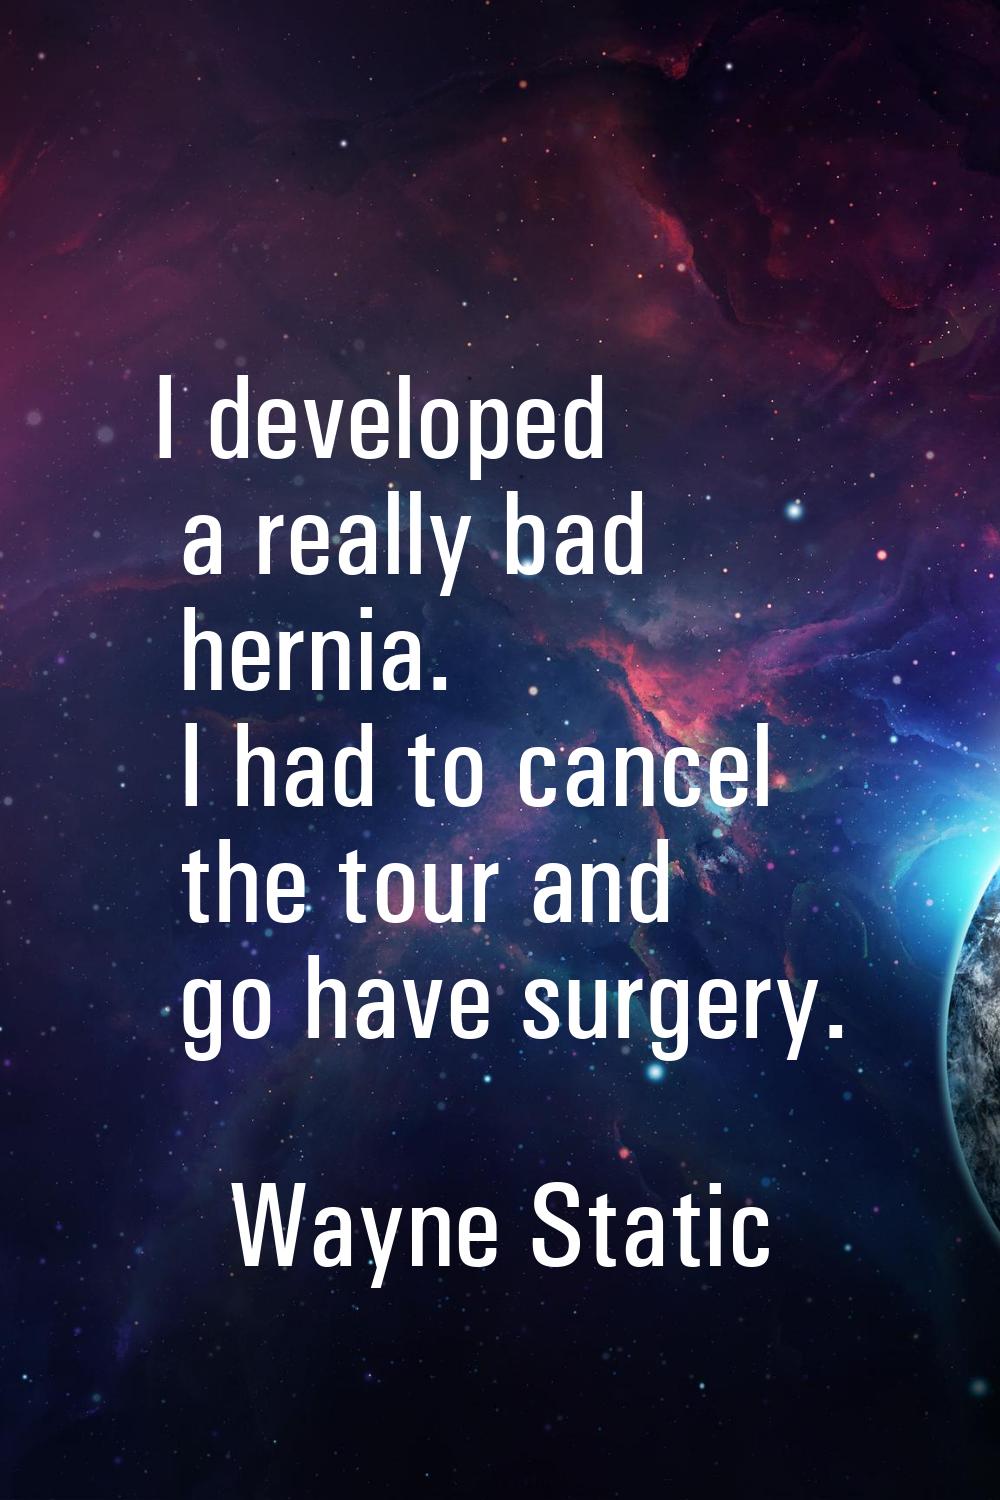 I developed a really bad hernia. I had to cancel the tour and go have surgery.